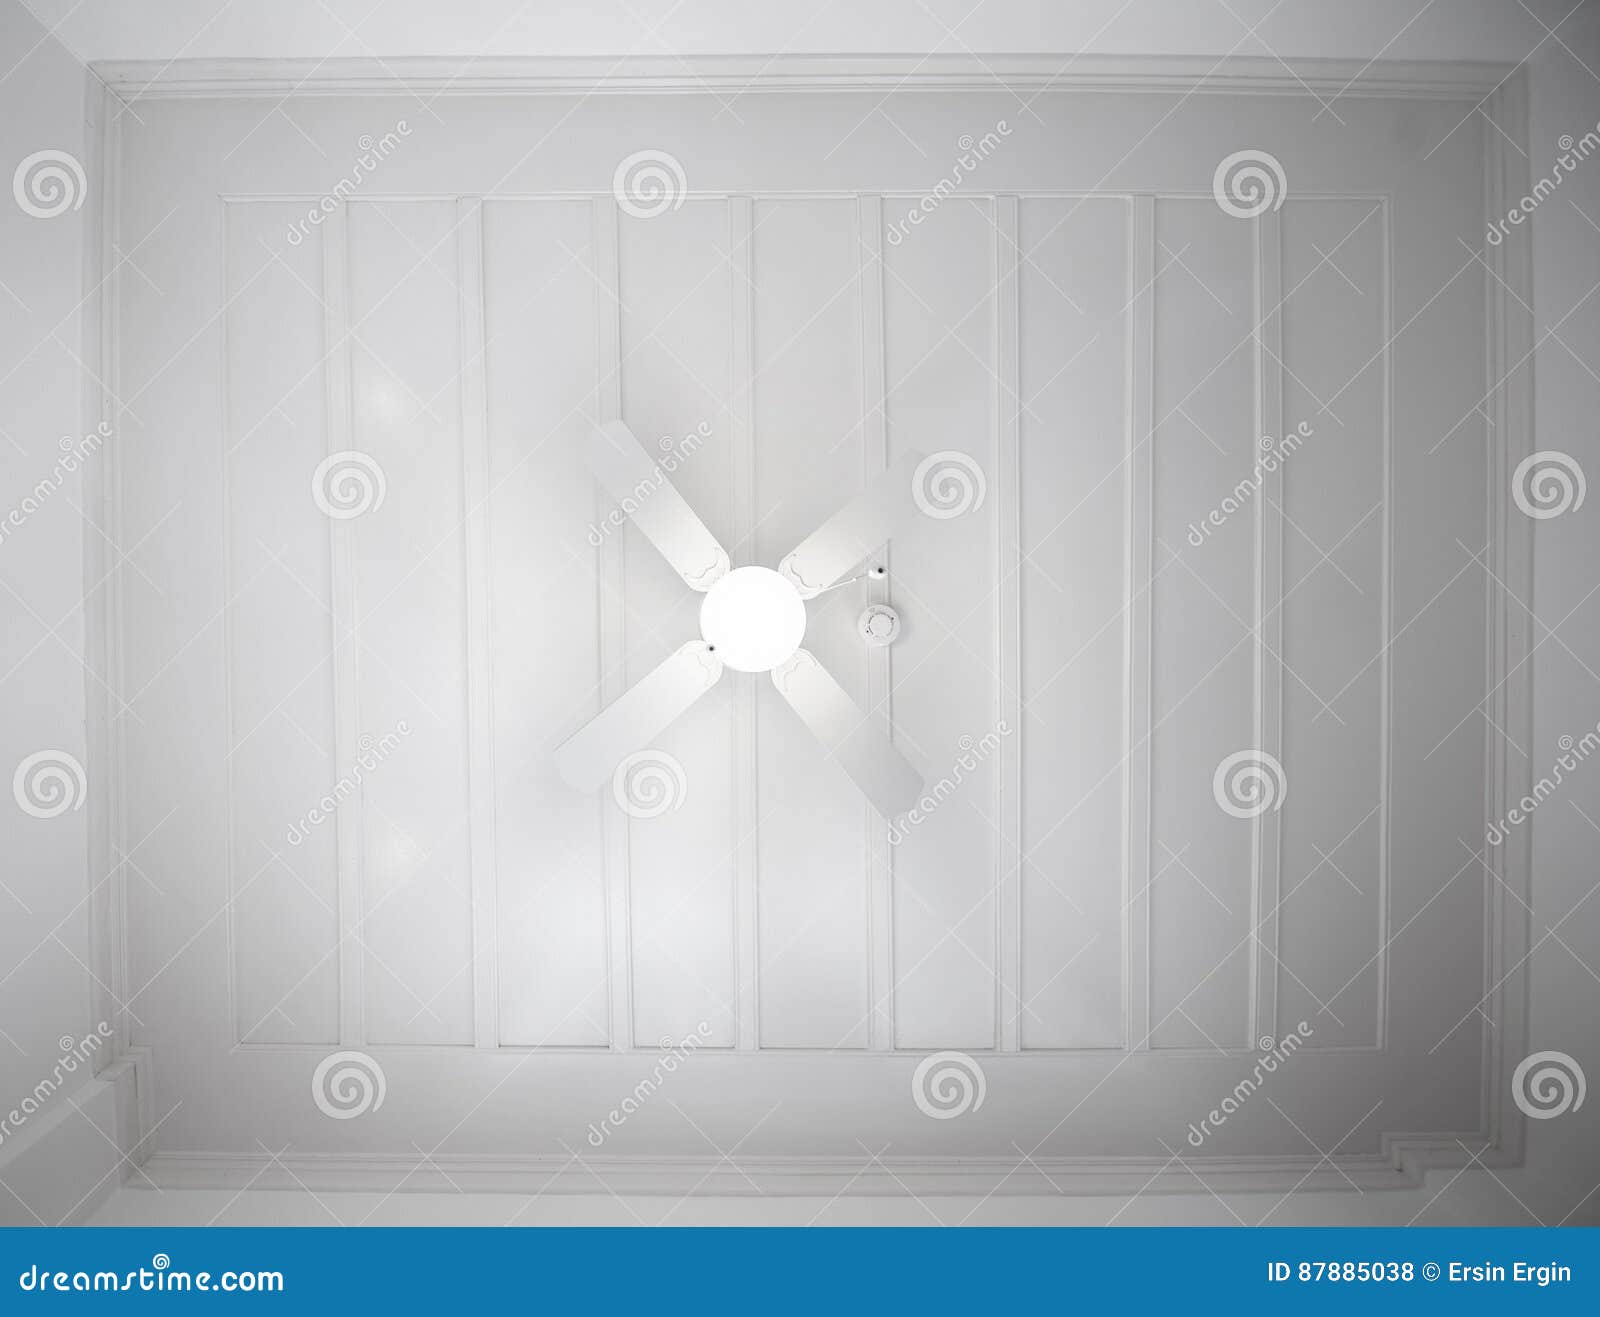 Vintage Hotel Ceiling Fan Stock Photo Image Of Spinning